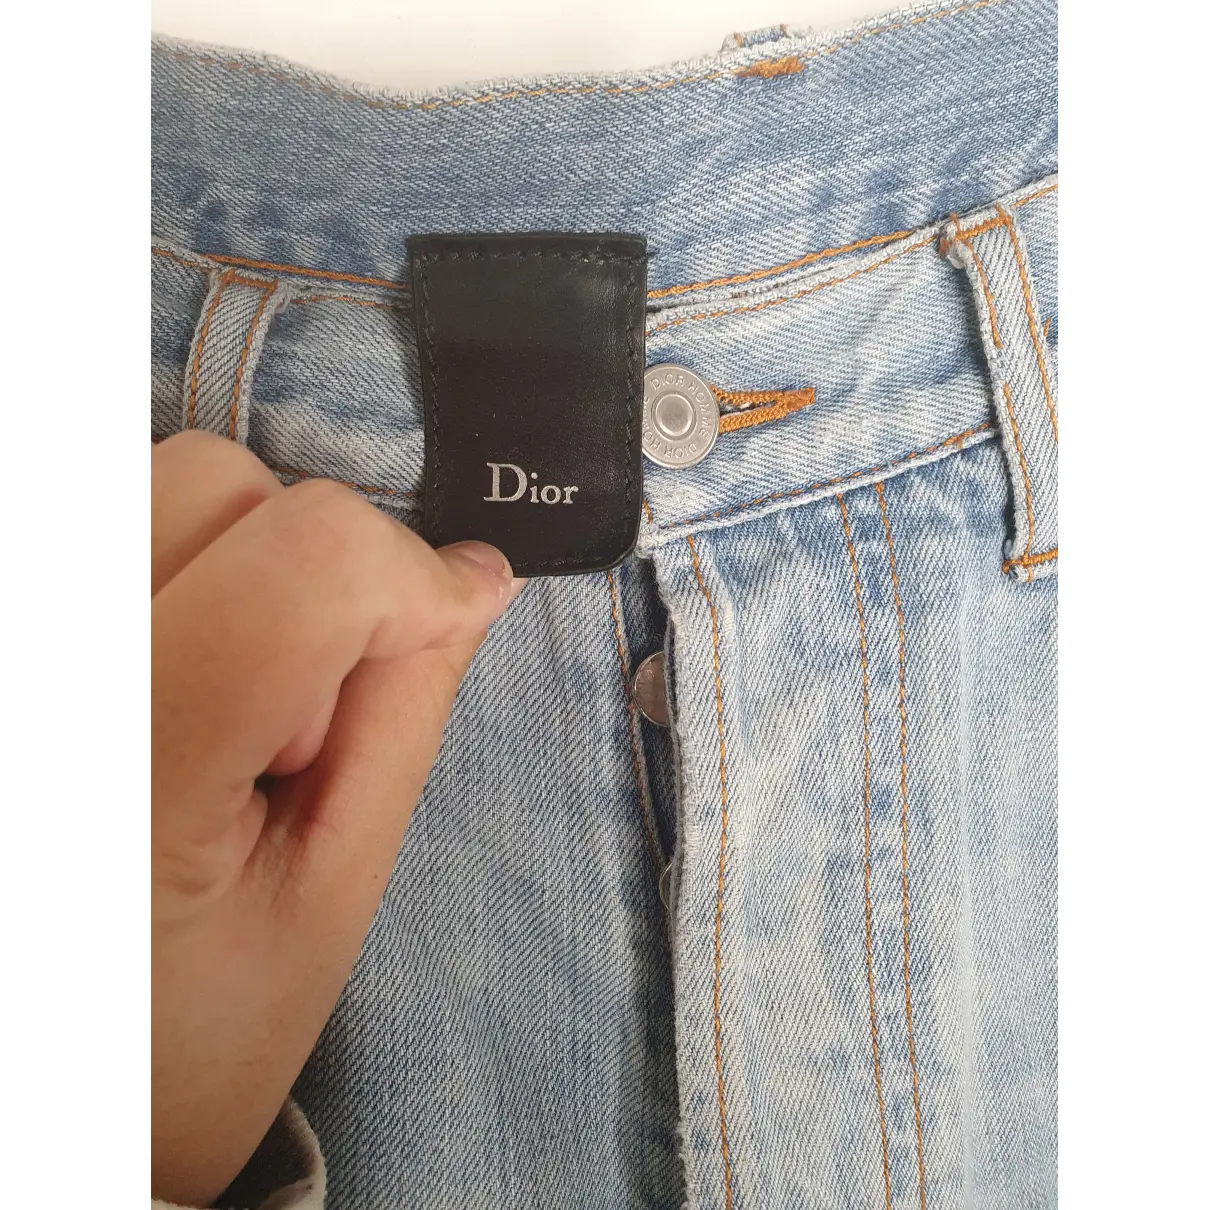 Buy Dior Homme Trousers online